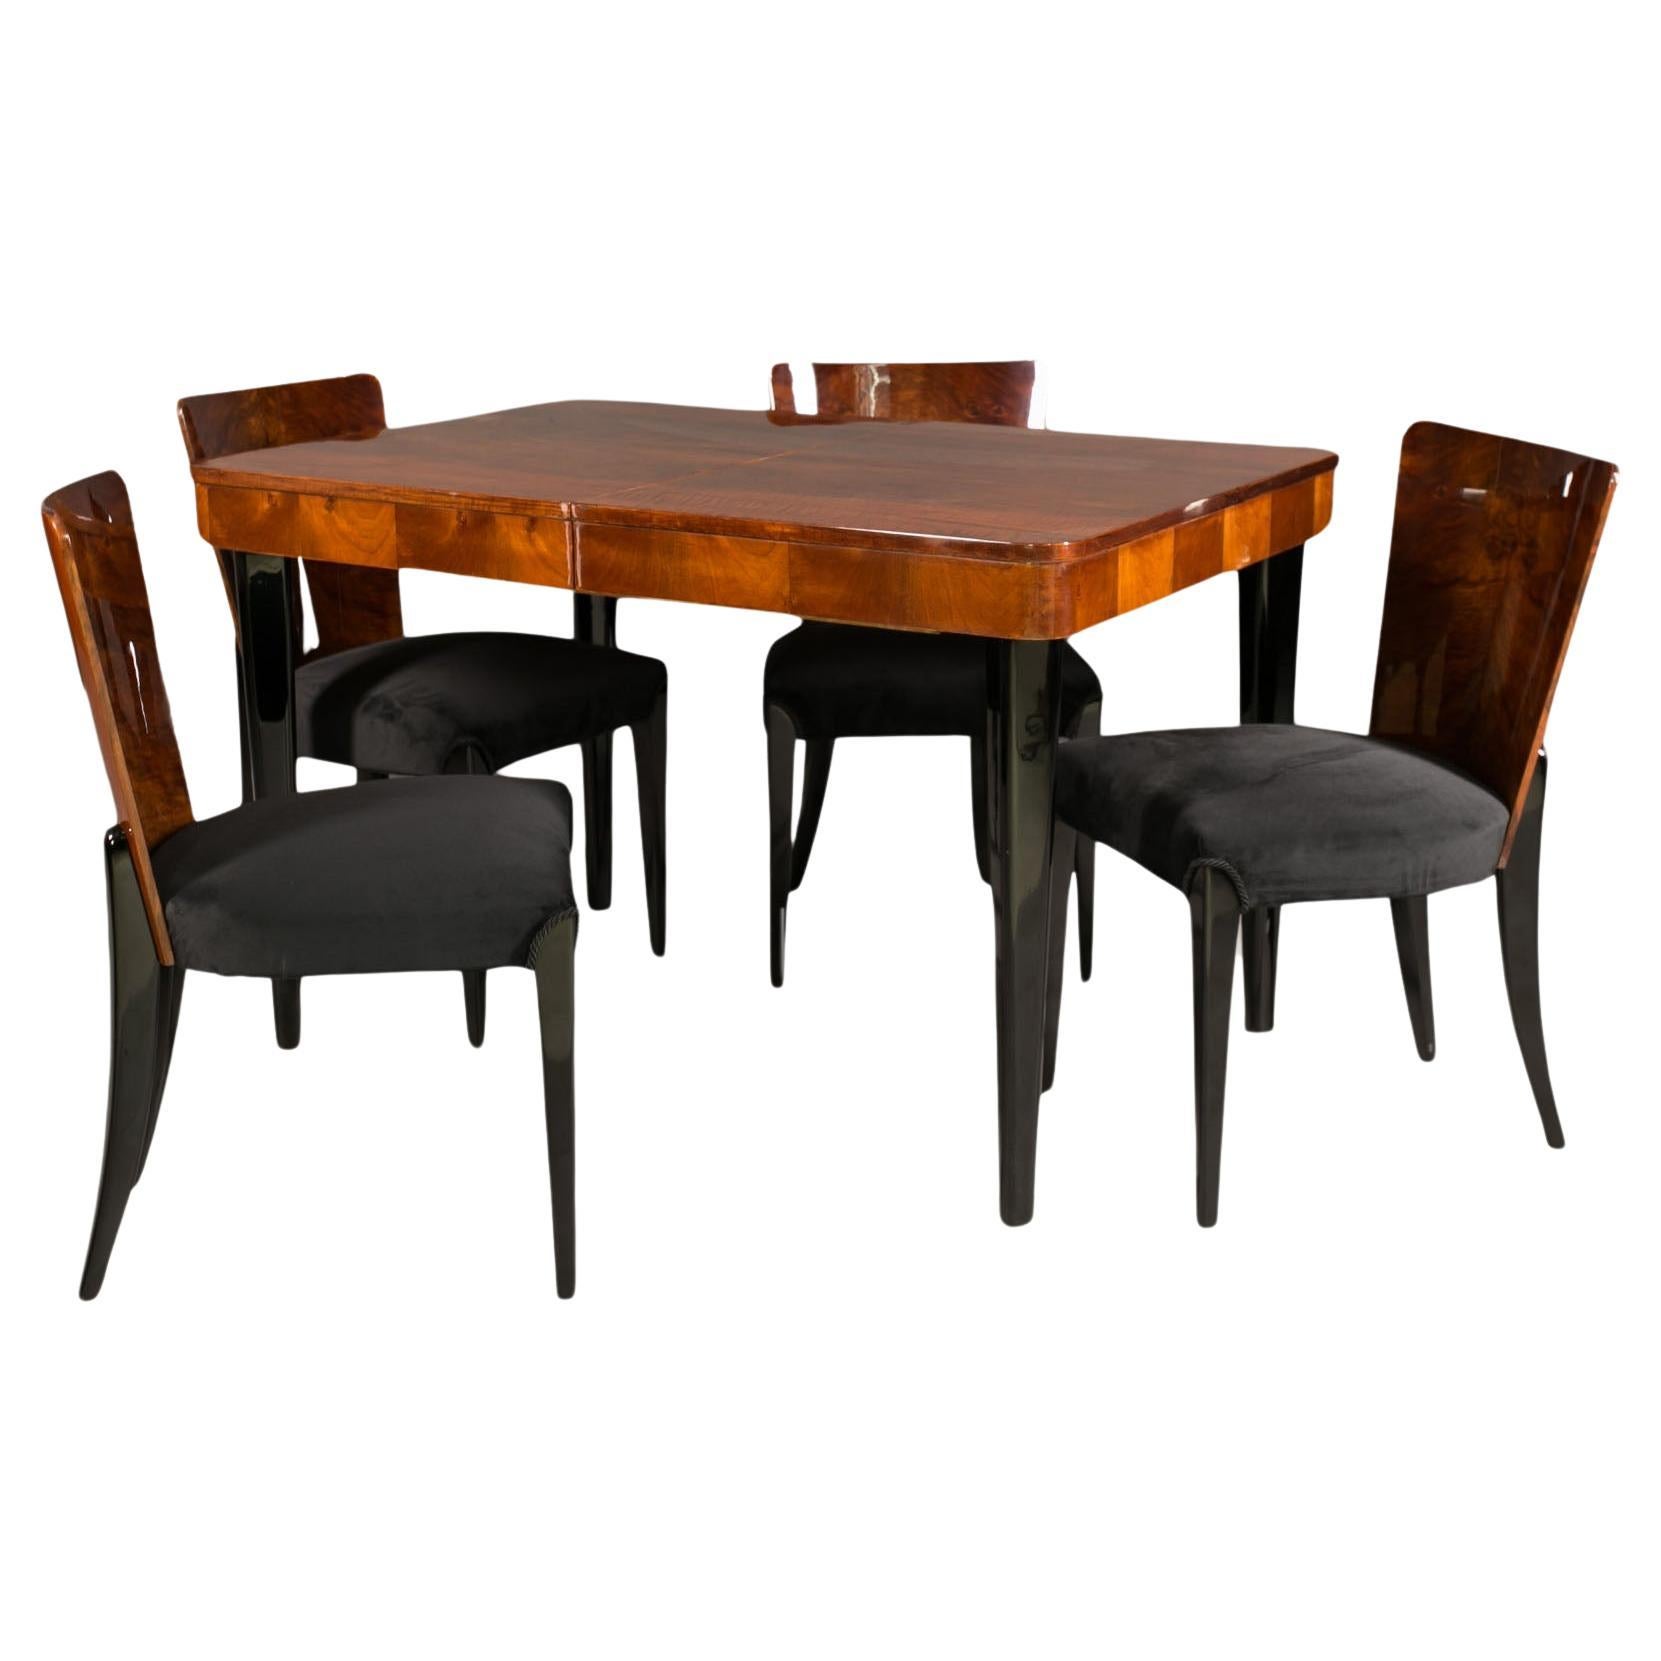 Art Deco Dining Set by J. Halabala, Extendable Table in Walnut, 4 Chairs